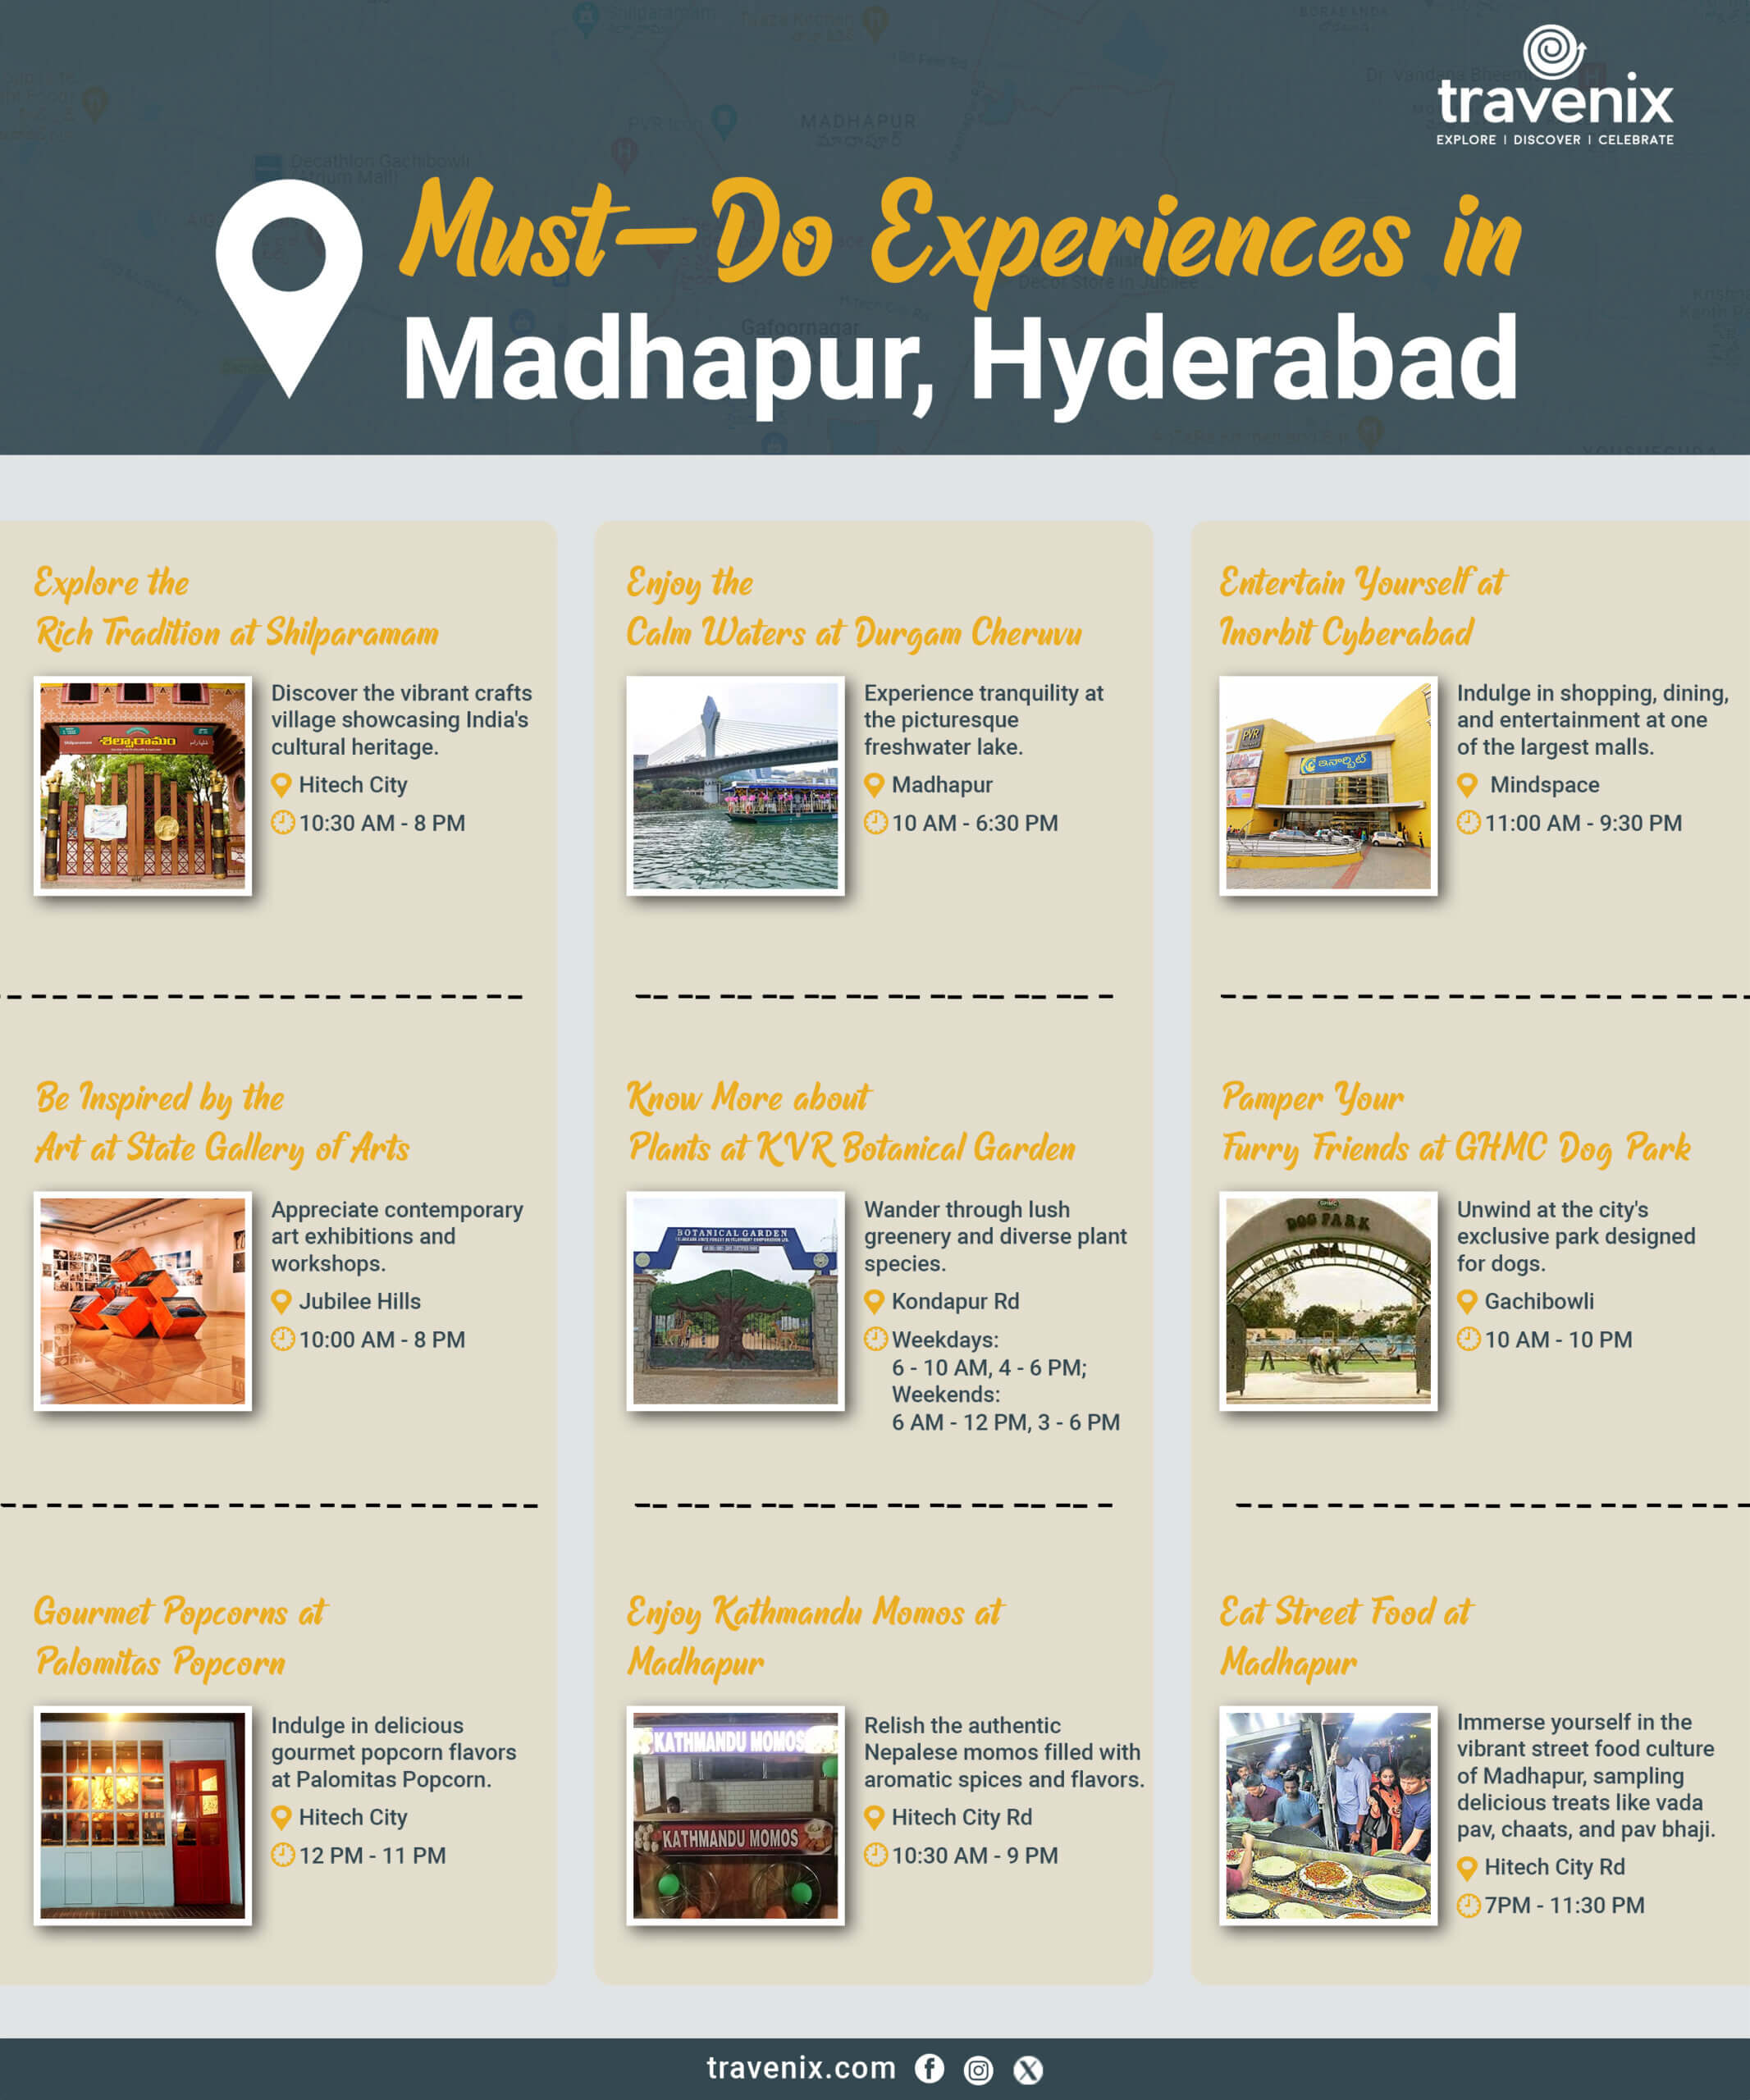 Must-Do Experiences in Madhapur